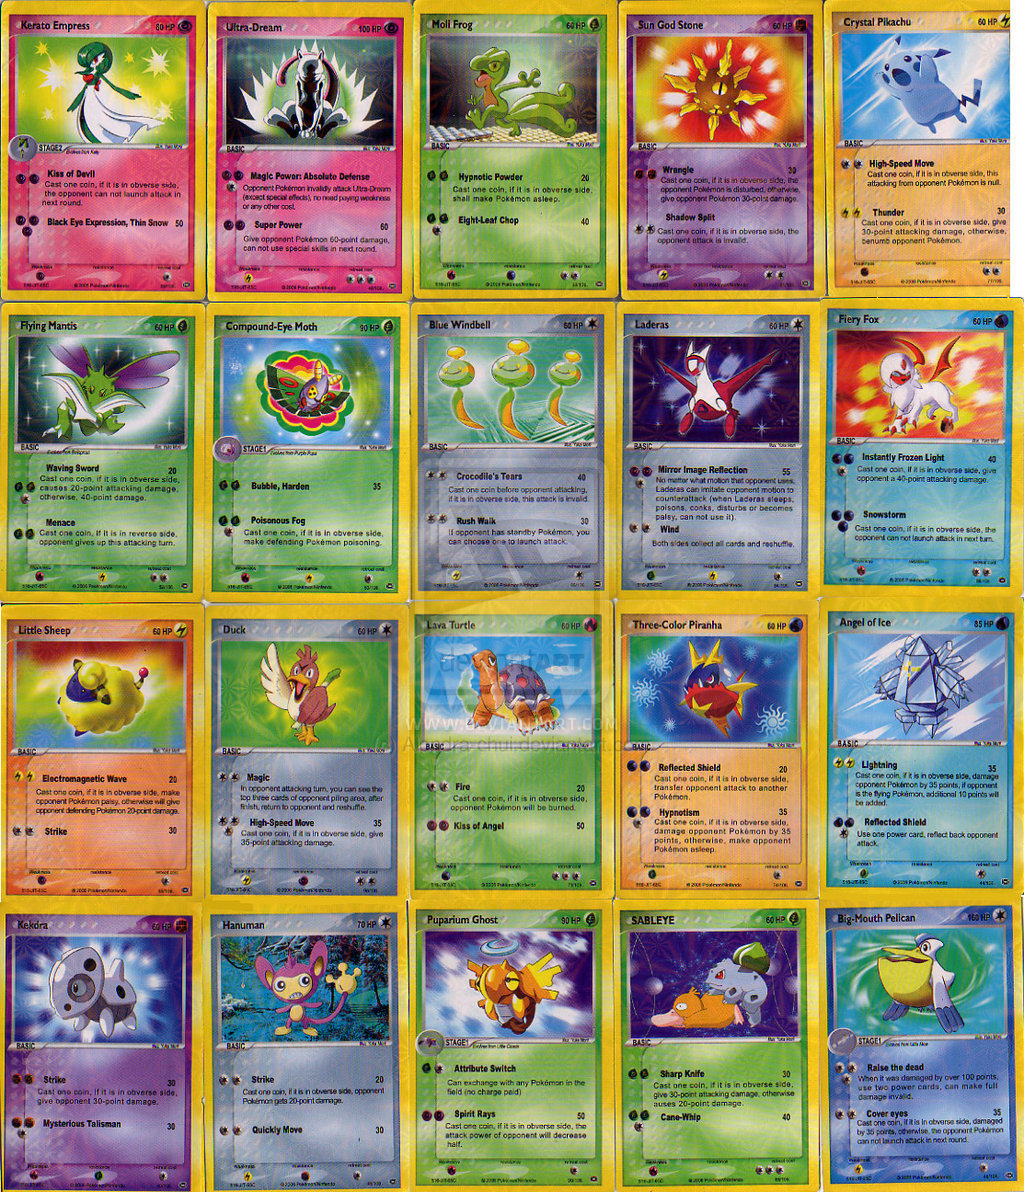 7-best-images-of-printable-pokemon-cards-real-size-print-pokemon-cards-real-pokemon-cards-and